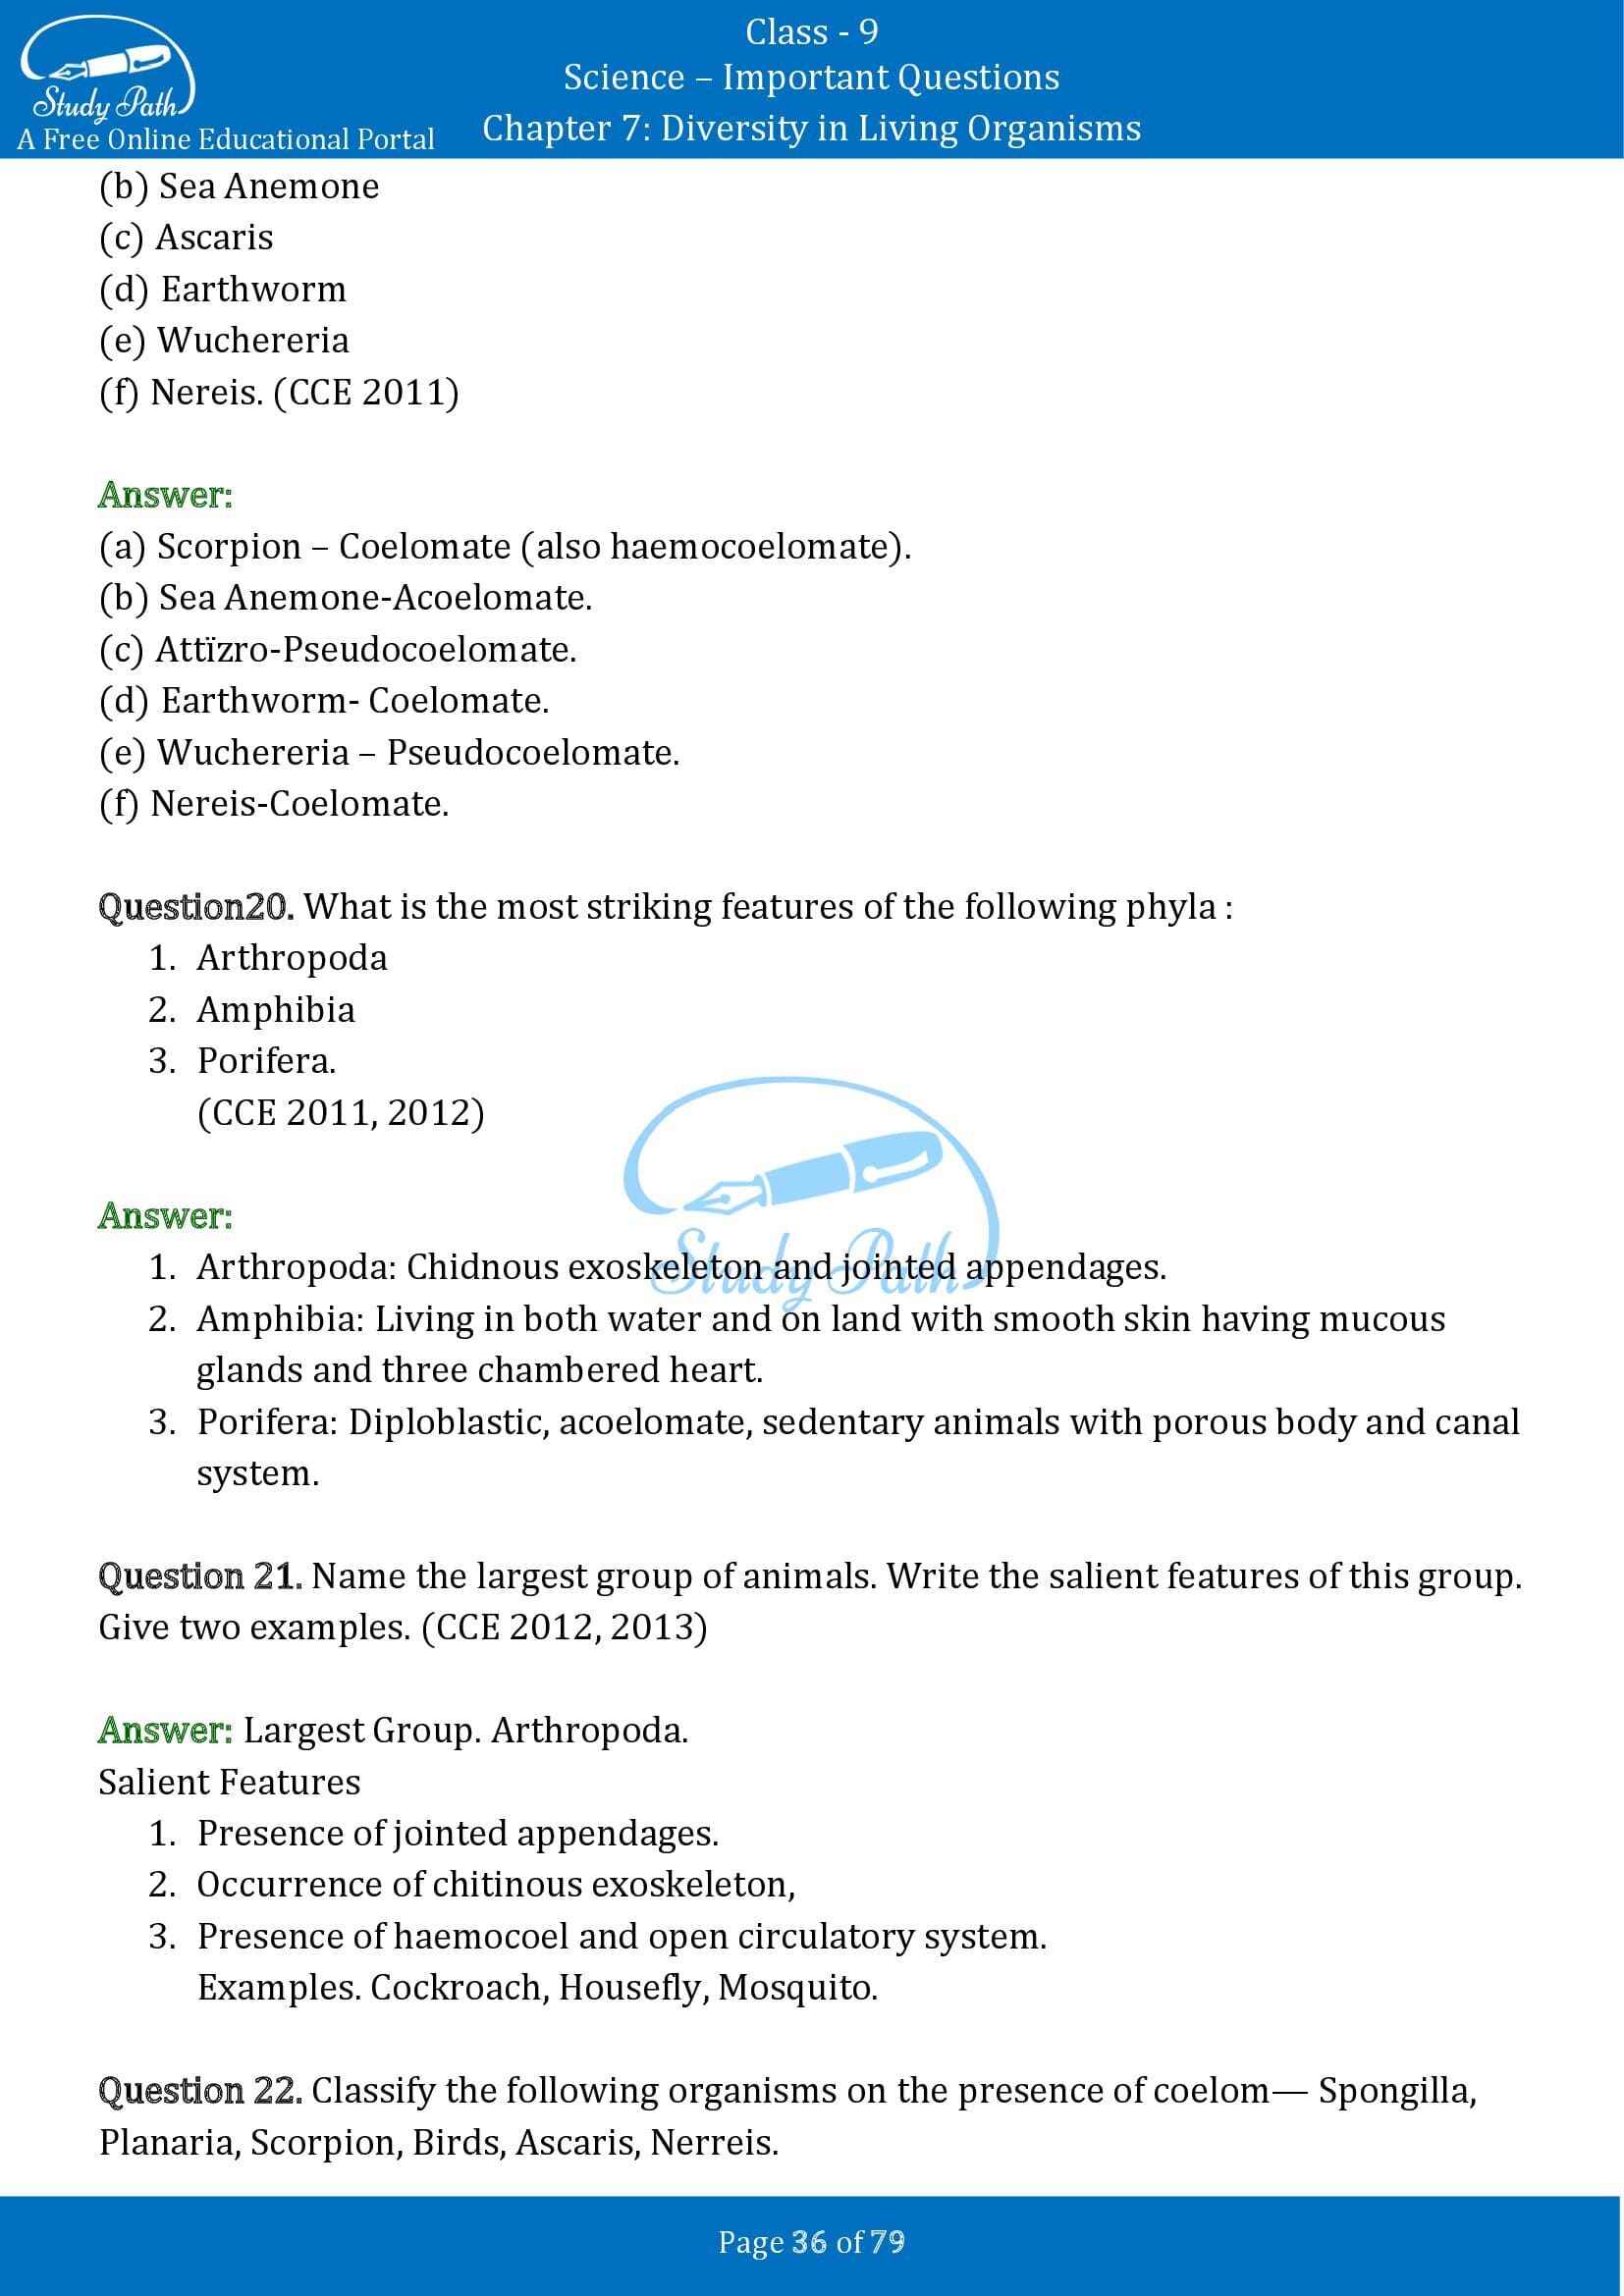 Important Questions for Class 9 Science Chapter 7 Diversity in Living Organisms 00036